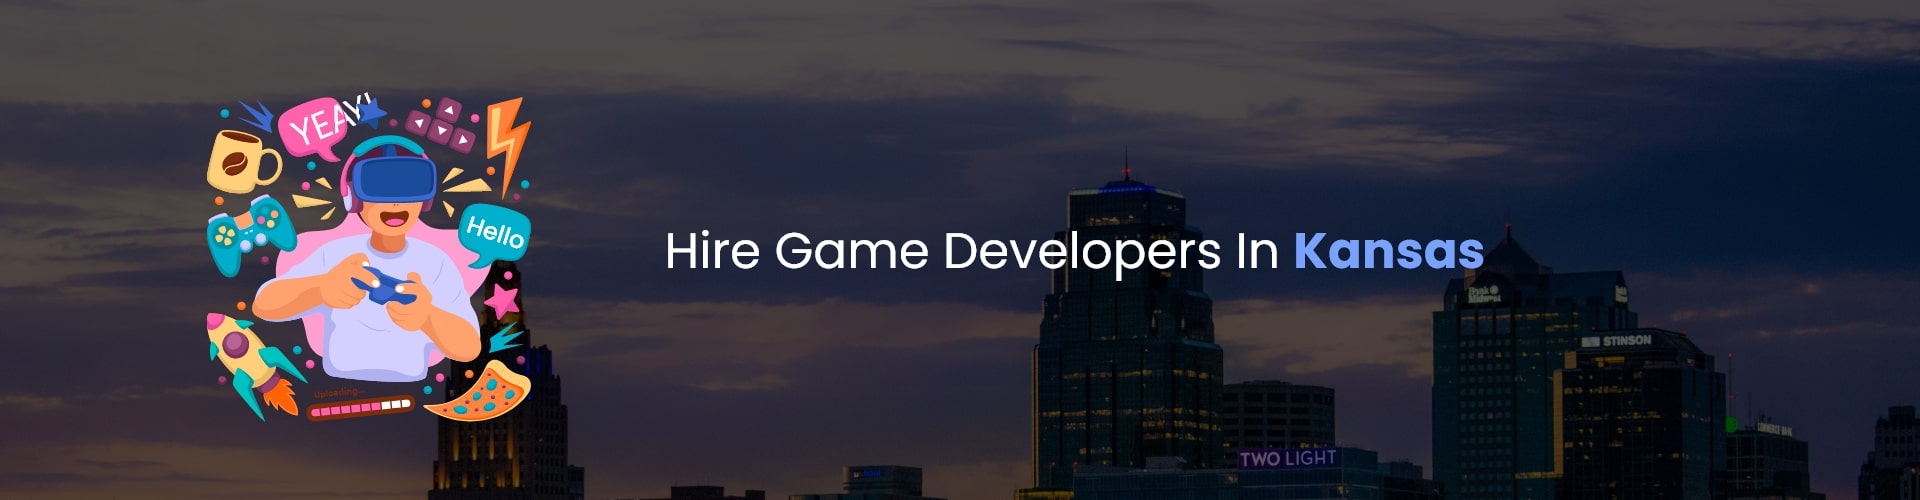 hire game developers in kansas